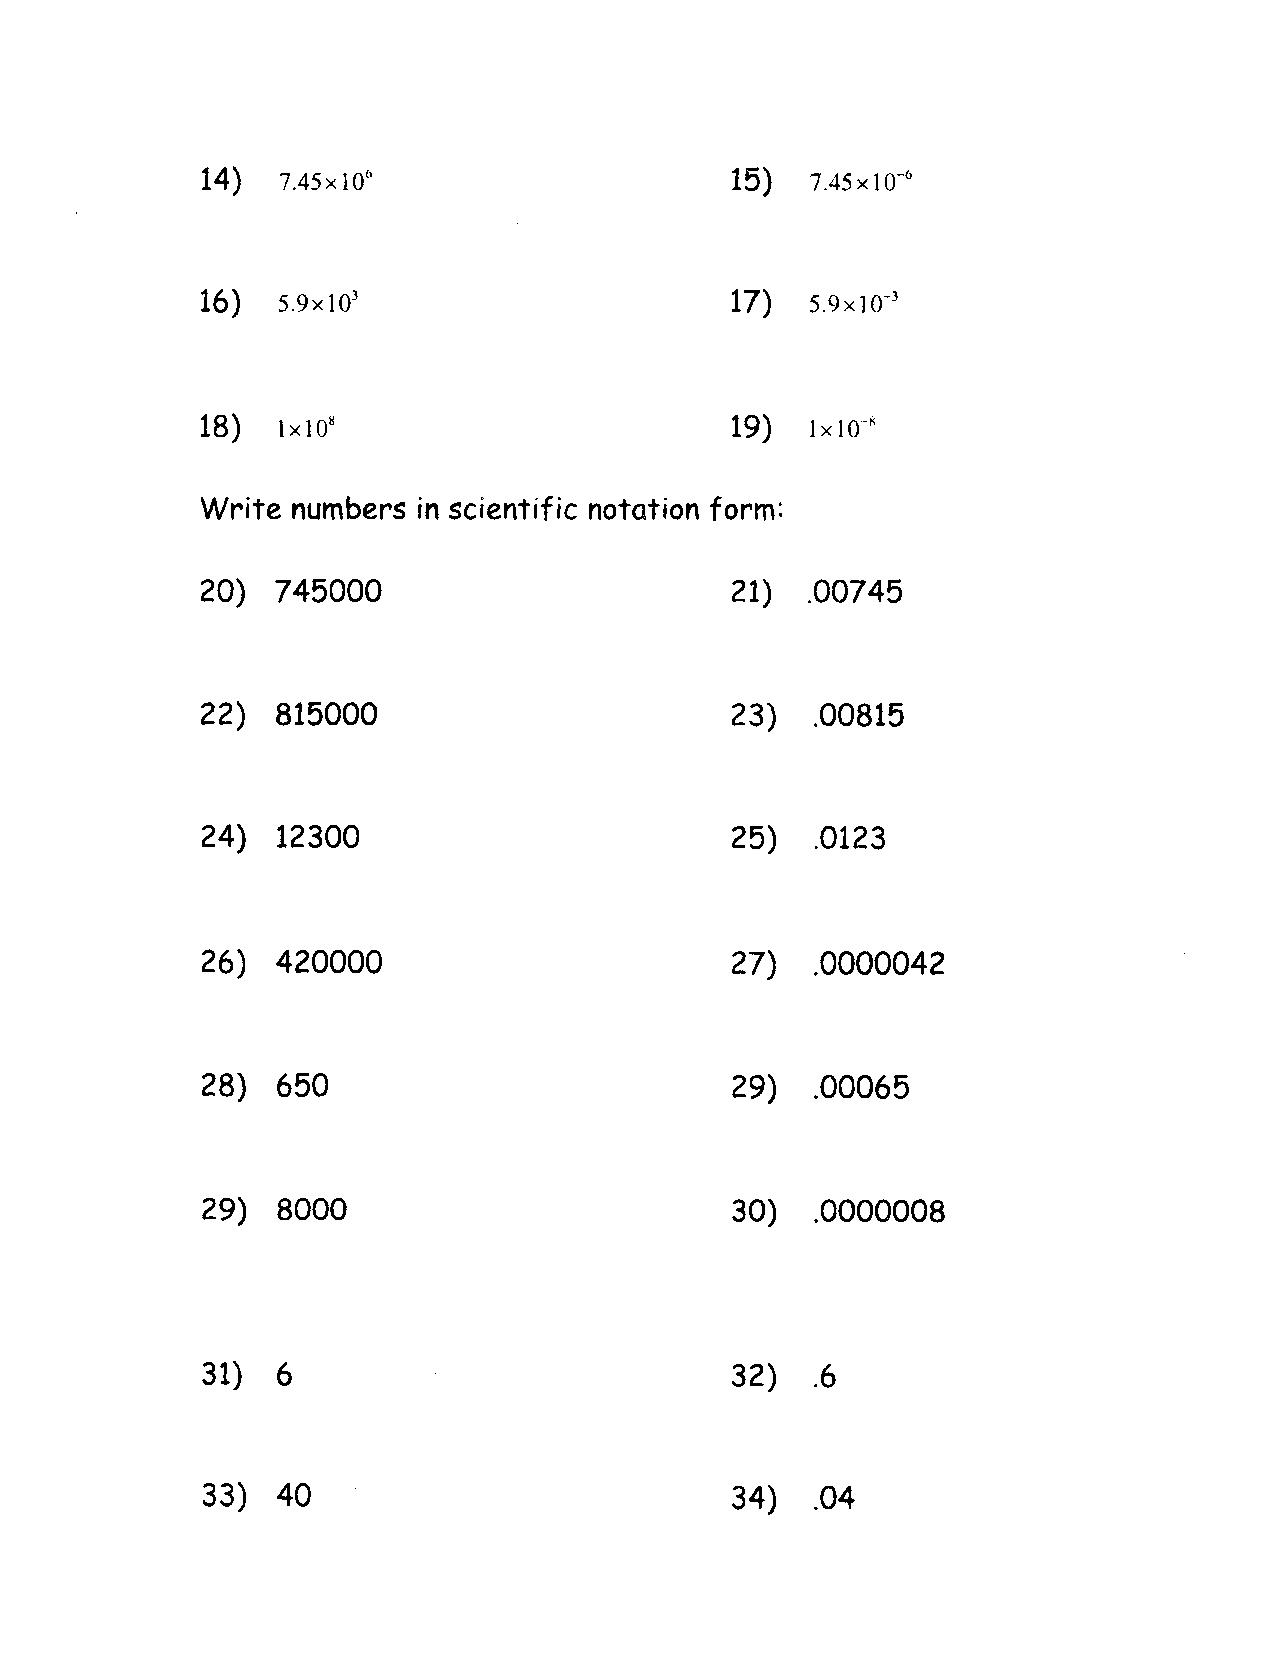 Solving Square Root Equations Worksheet